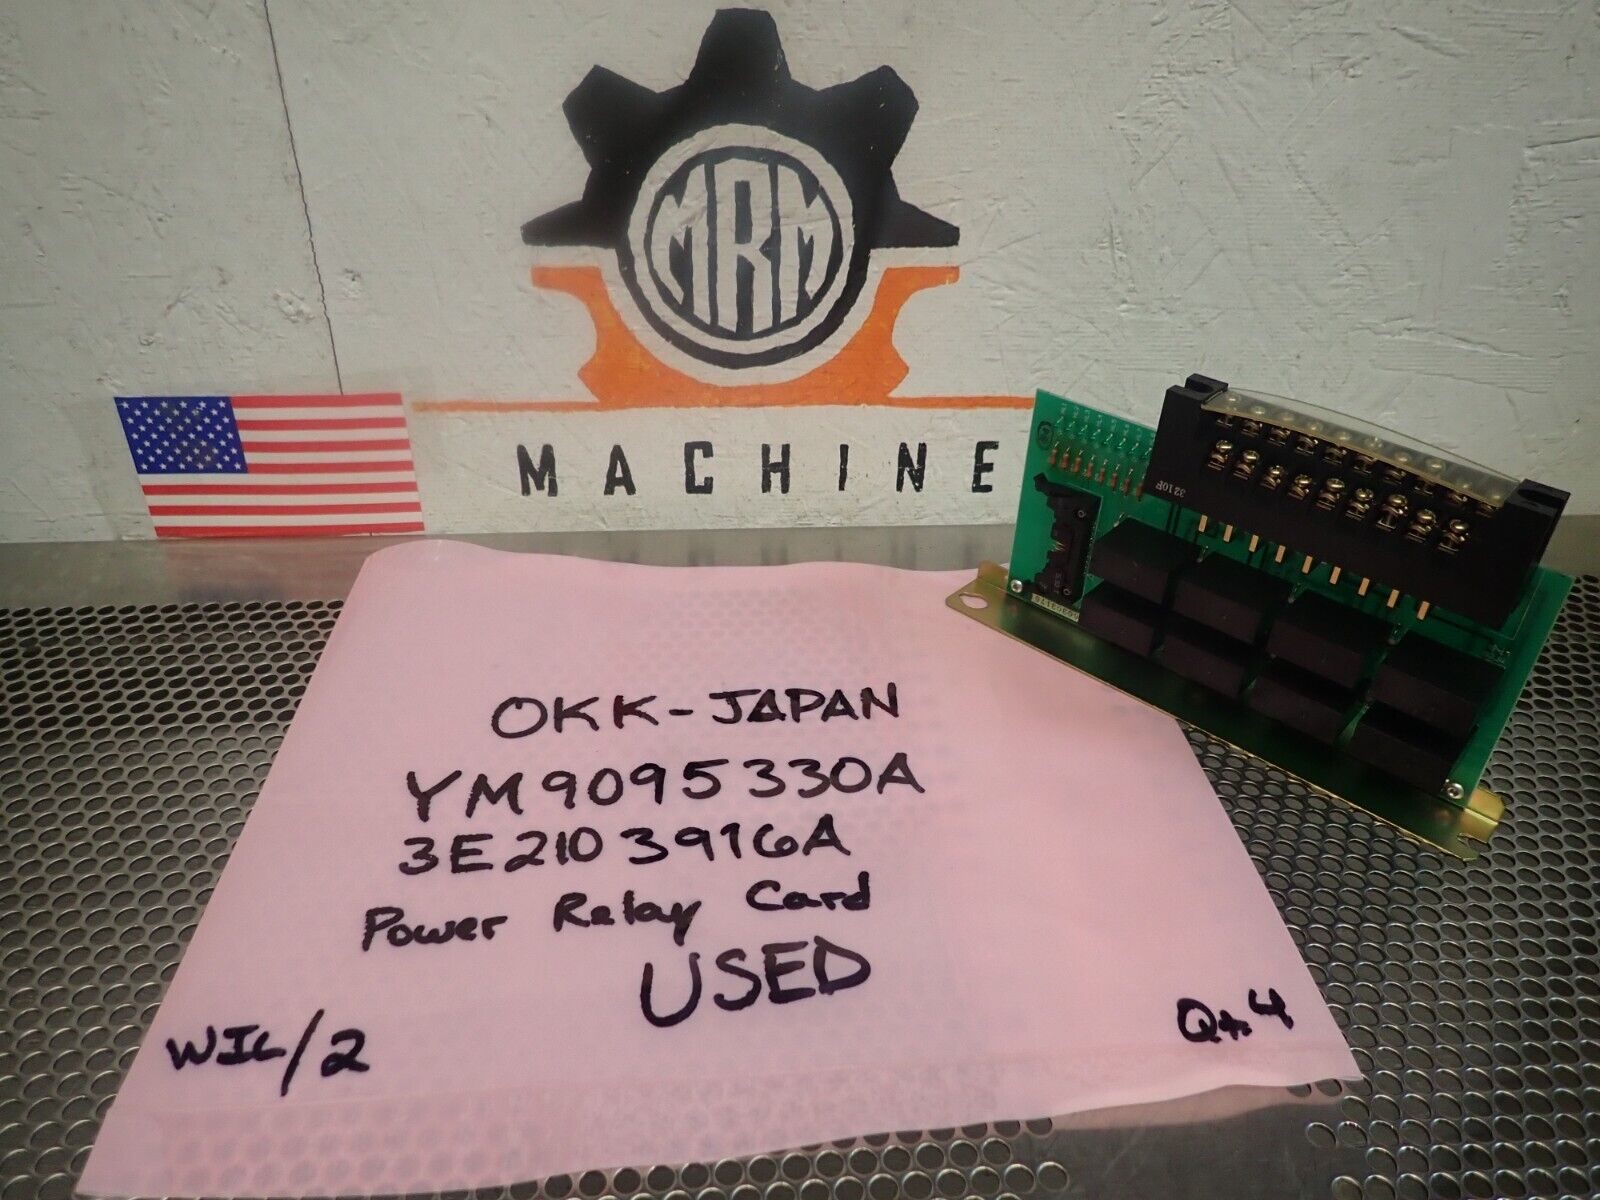 OKK YM9095330A 3E2103916A Power Relay Card Used With Warranty See All Pictures